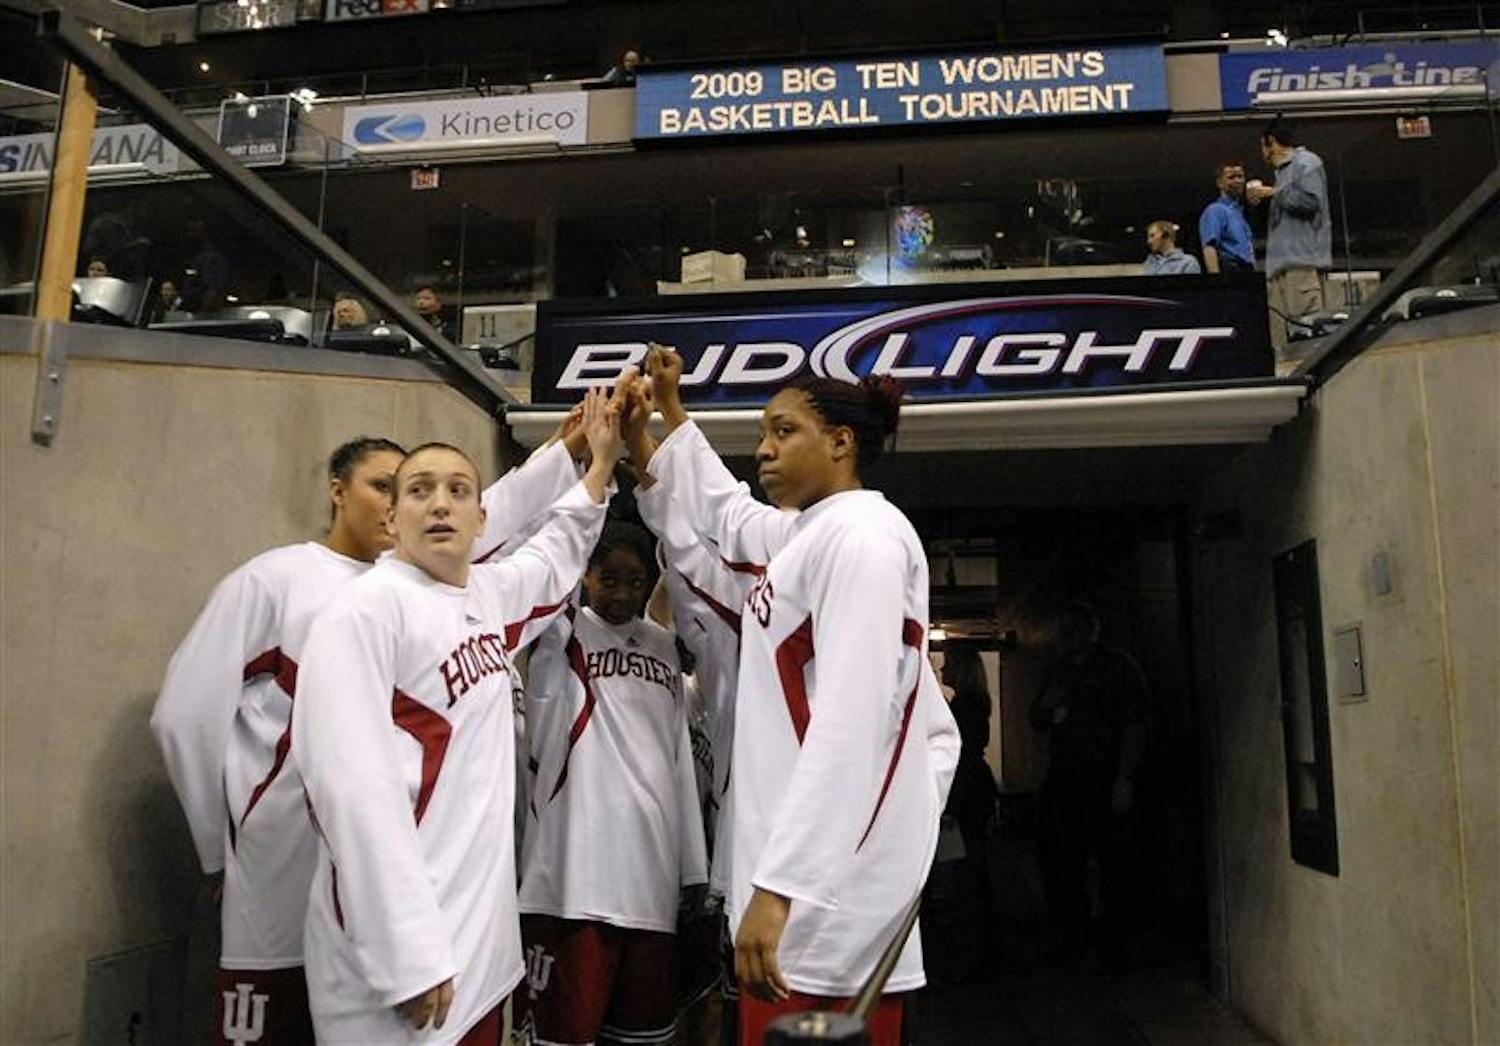 Members of the IU basketball team huddle up before taking the court for a game against Purdue during the second round of the Big Ten Tournament on March 6 at Conseco Fieldhouse in Indianapolis.